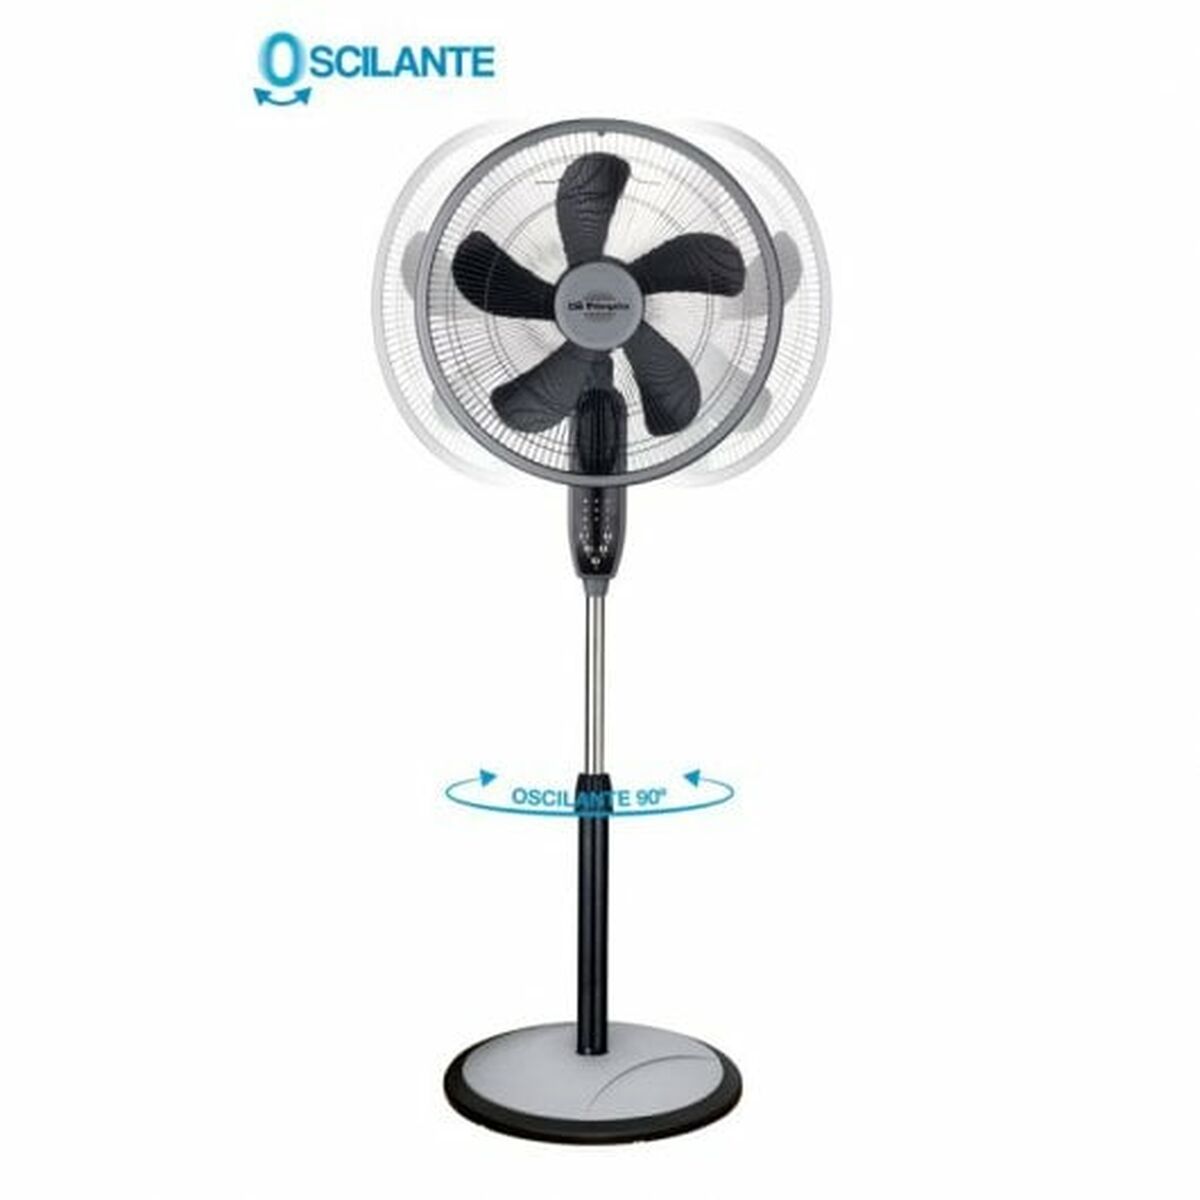 Freestanding Fan Orbegozo SF0246 55 W Black, Orbegozo, Home and cooking, Portable air conditioning, freestanding-fan-orbegozo-sf0246-55-w-black, Brand_Orbegozo, category-reference-2399, category-reference-2450, category-reference-2451, category-reference-t-19656, category-reference-t-21087, category-reference-t-25217, category-reference-t-29130, Condition_NEW, ferretería, Price_50 - 100, summer, RiotNook